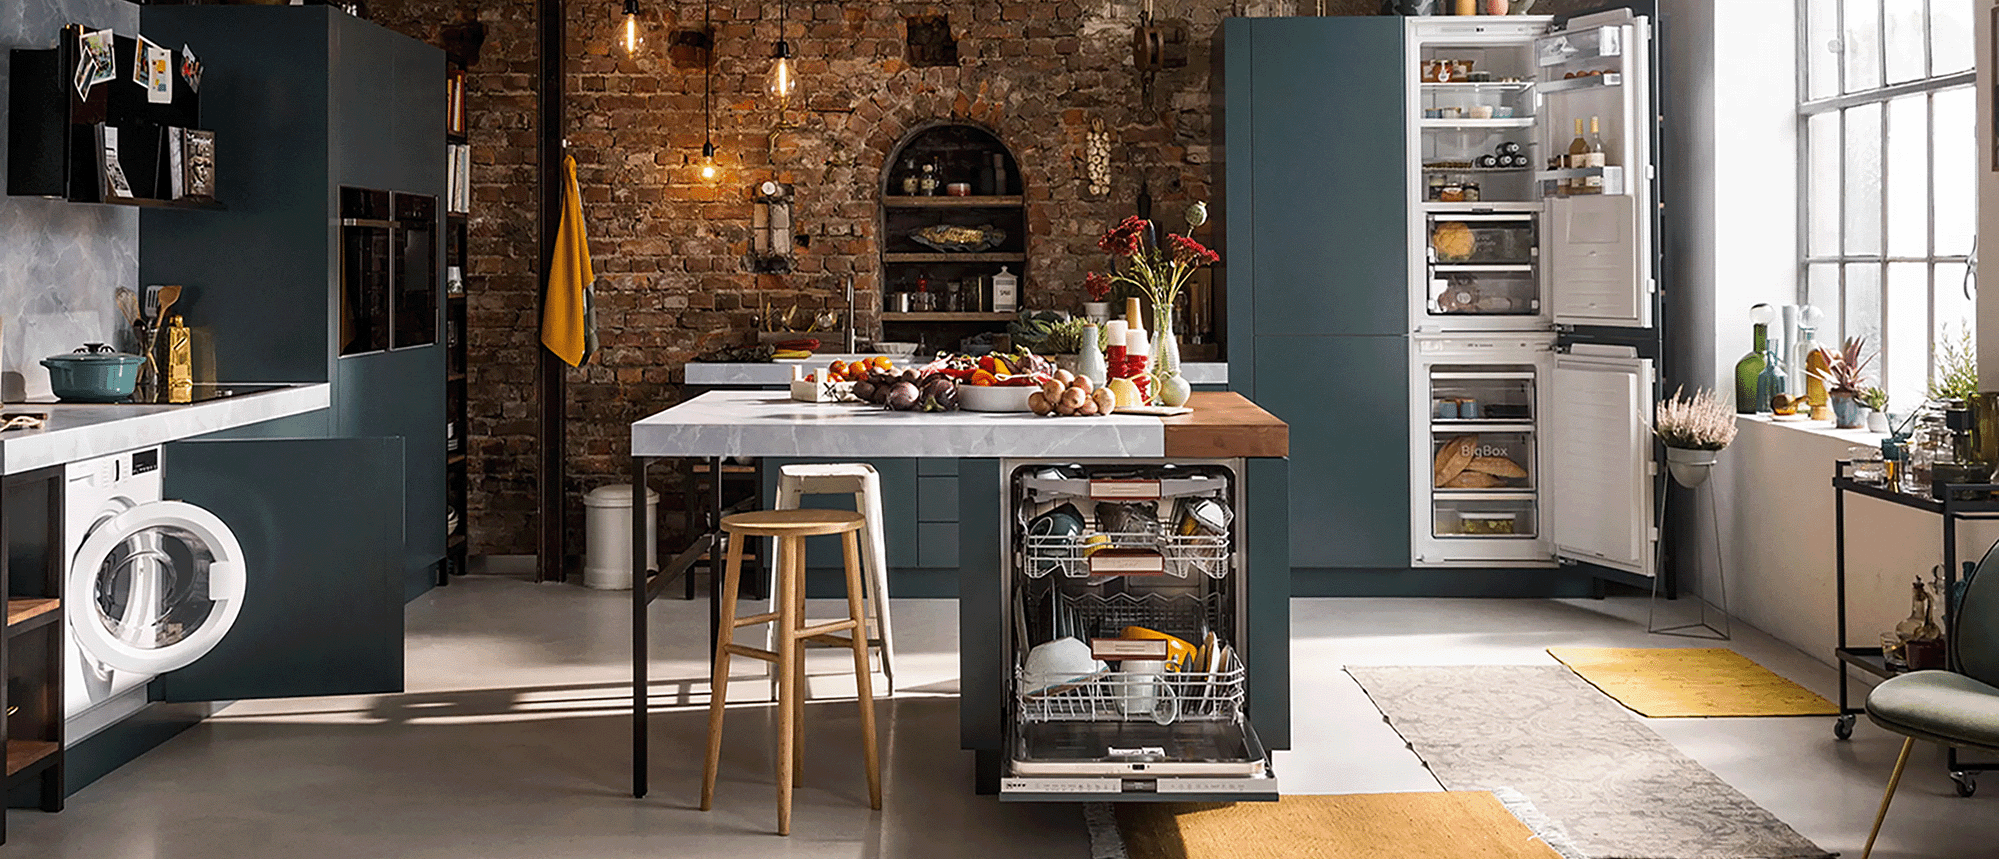 Image feature a rustic contemporary styled kitchen with Neff appliances